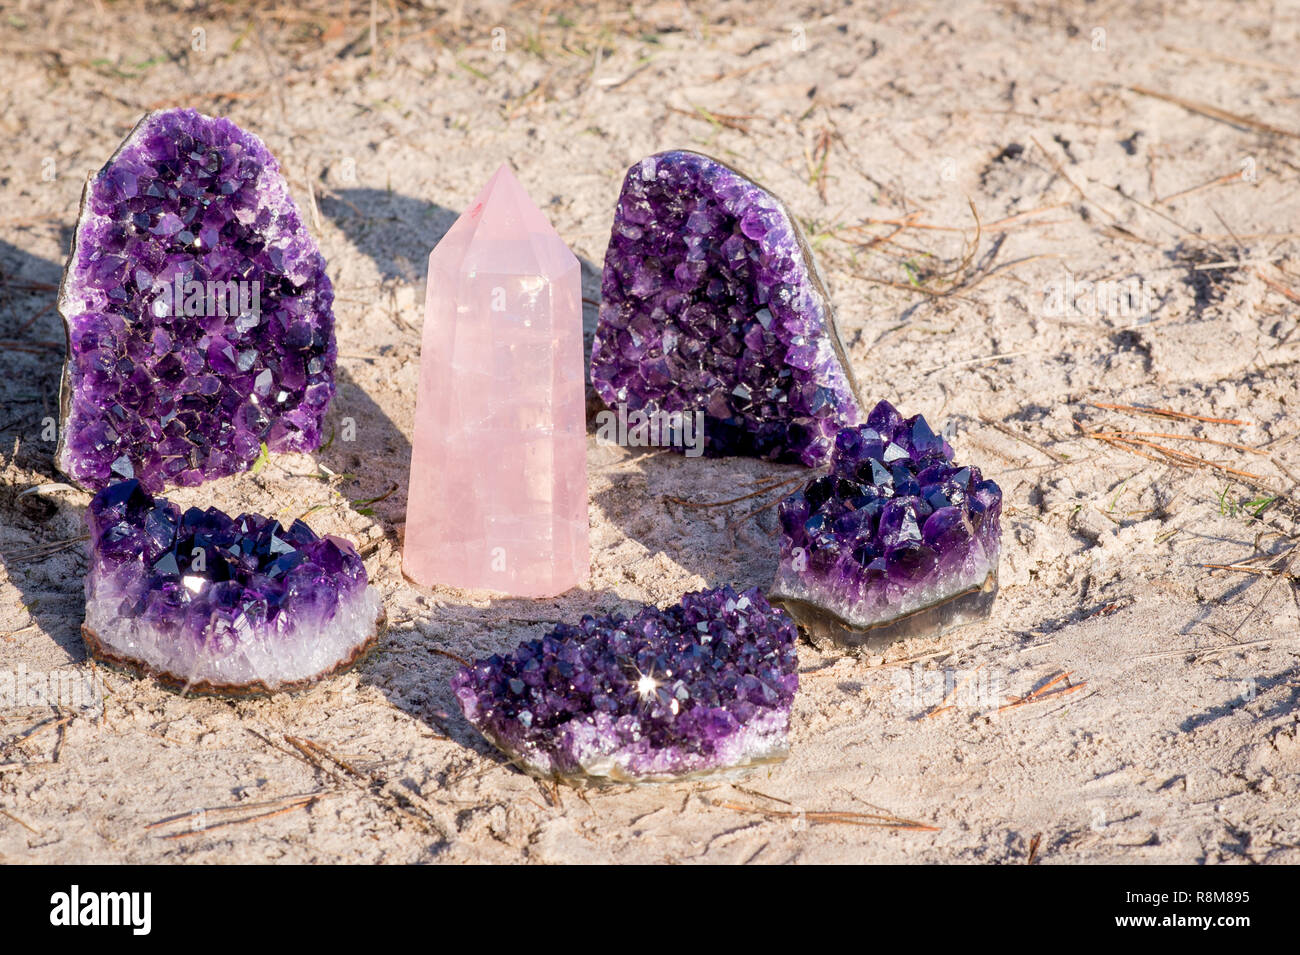 1 rose quartz gemstone surround by 5 amethyst crystals laying on the beach and in the grass Stock Photo